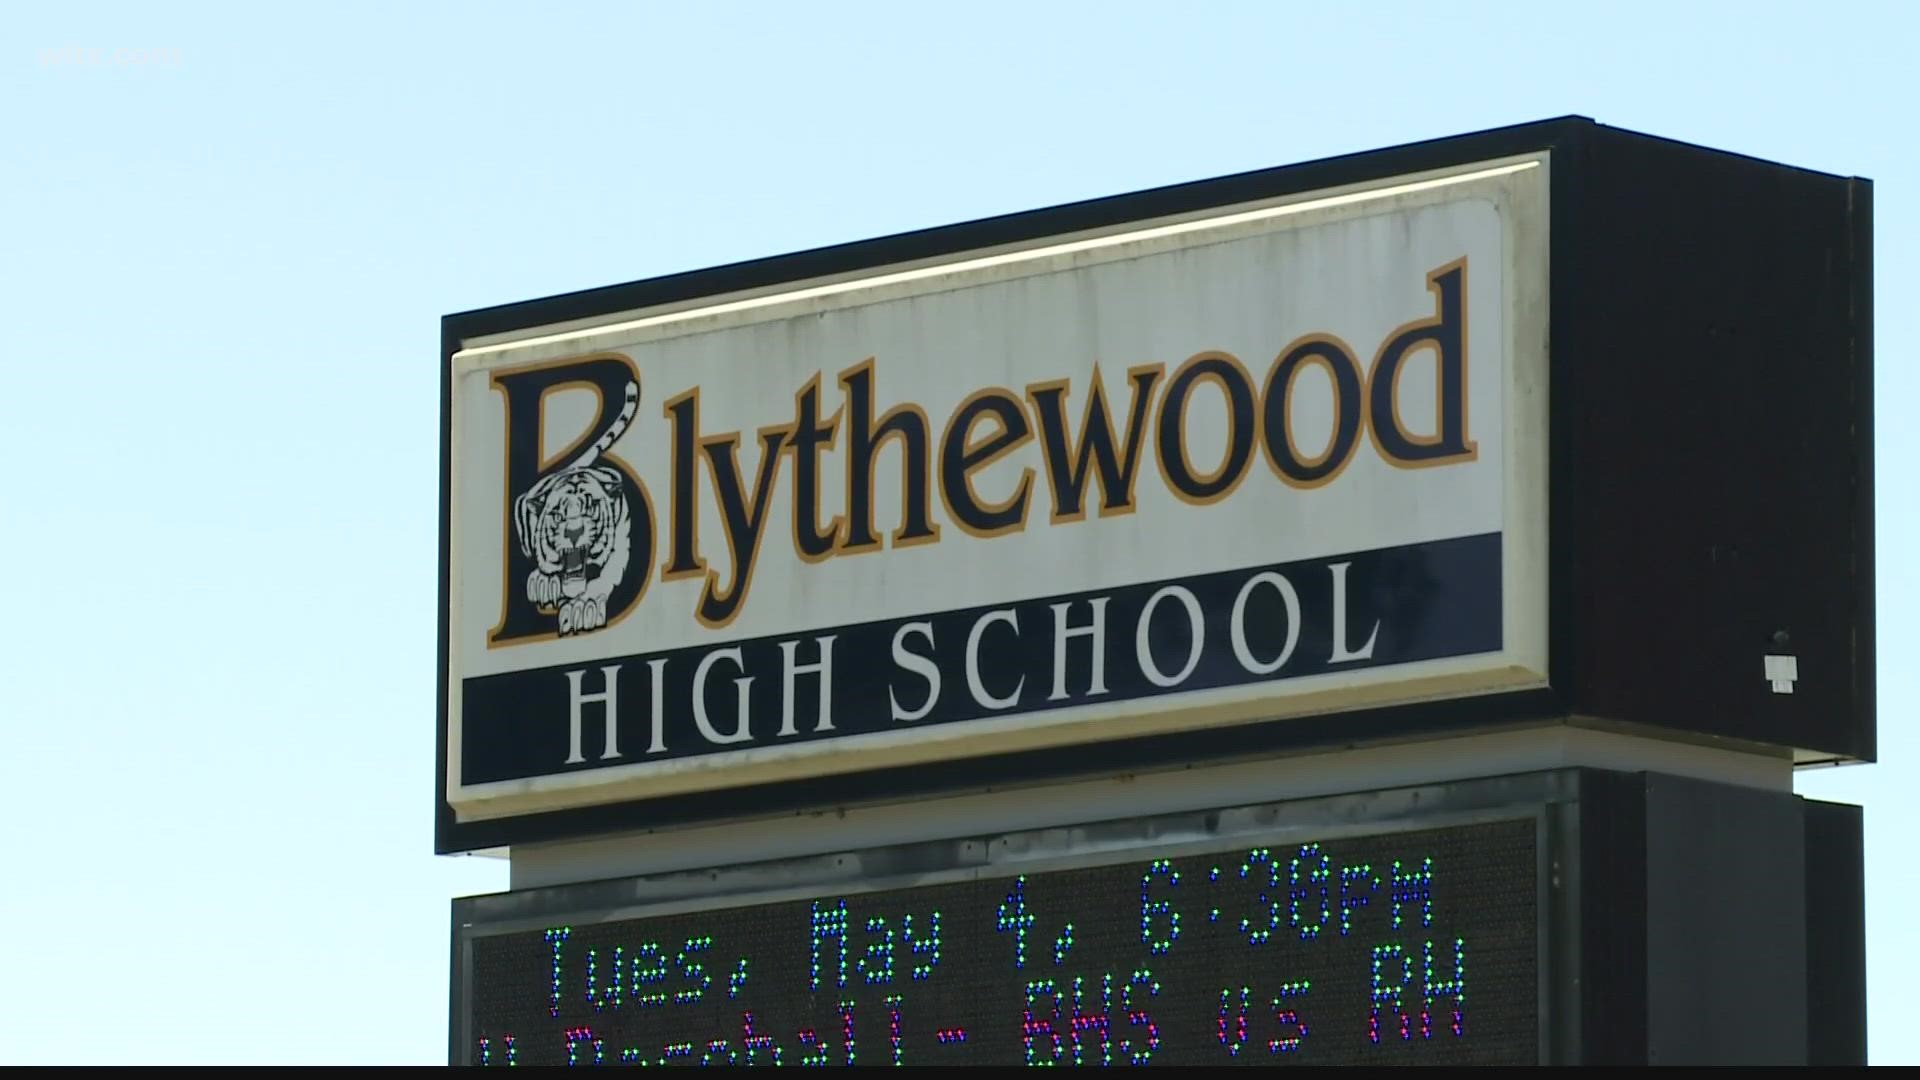 The student at Blythewood high school was taken into custody.